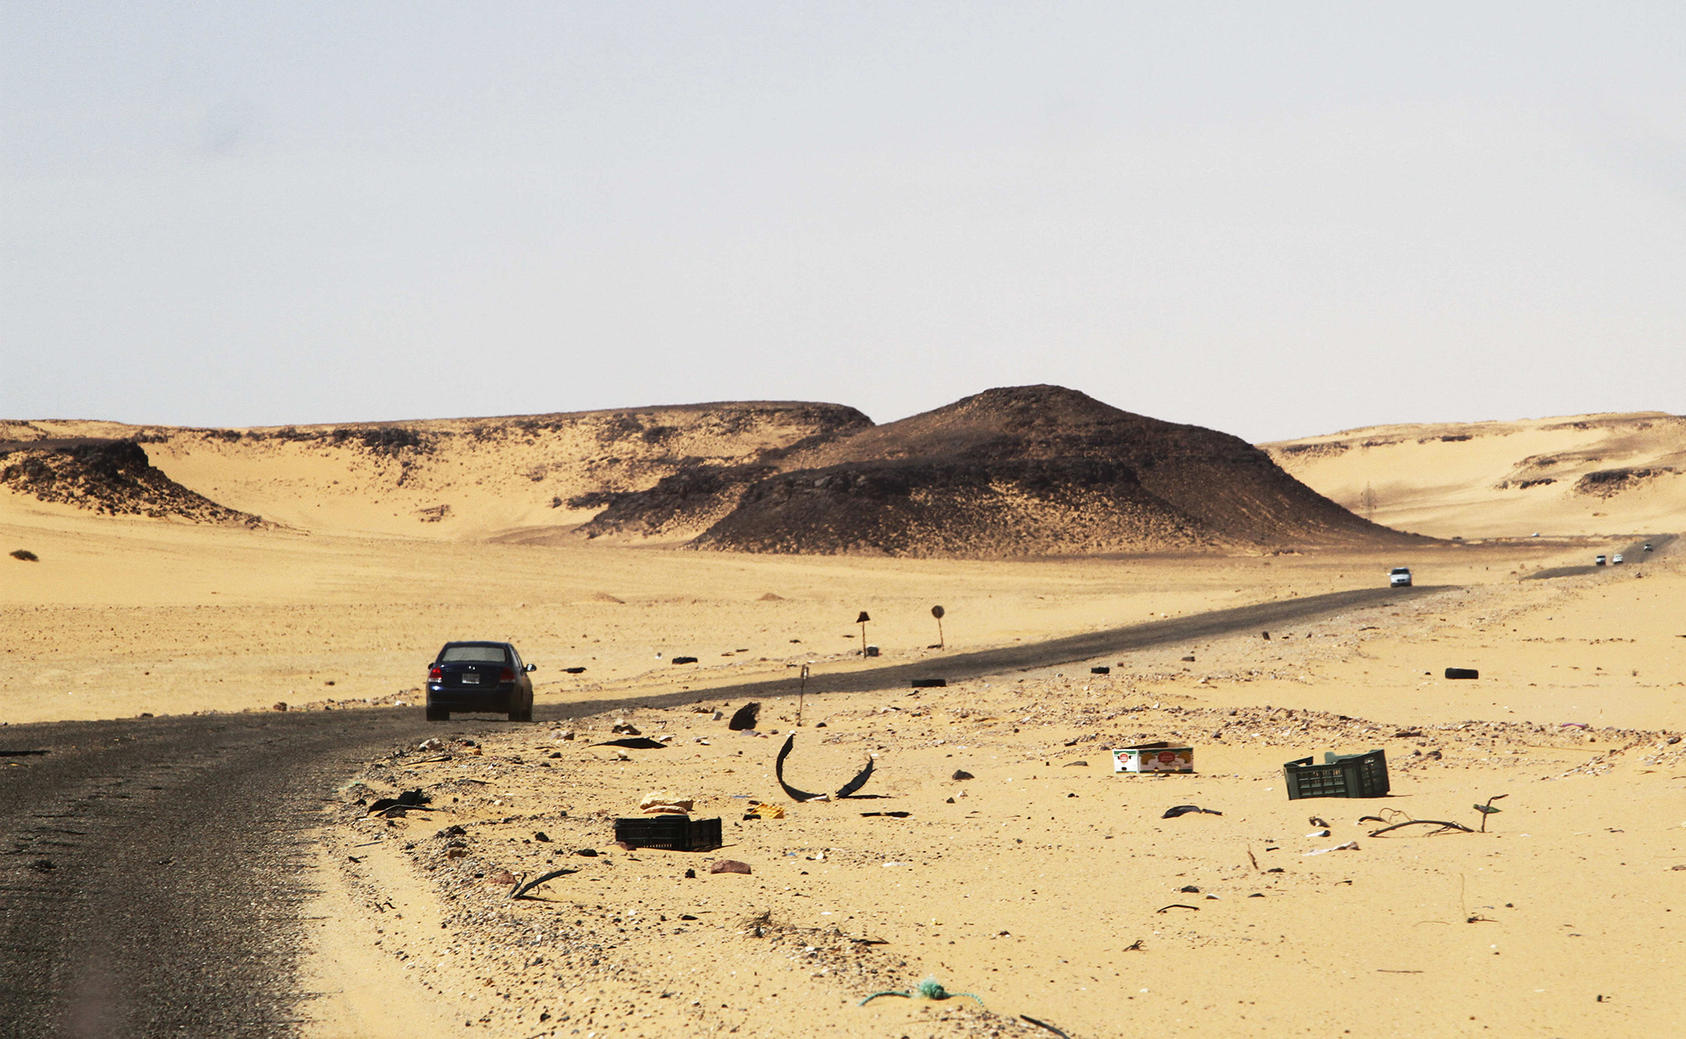 A car drives along the road between Sebha and Ubari in southwestern Libya on December 24, 2013. Both cities are ethnically and tribally mixed, making them flash points for conflict. (Paul Schemm/AP)